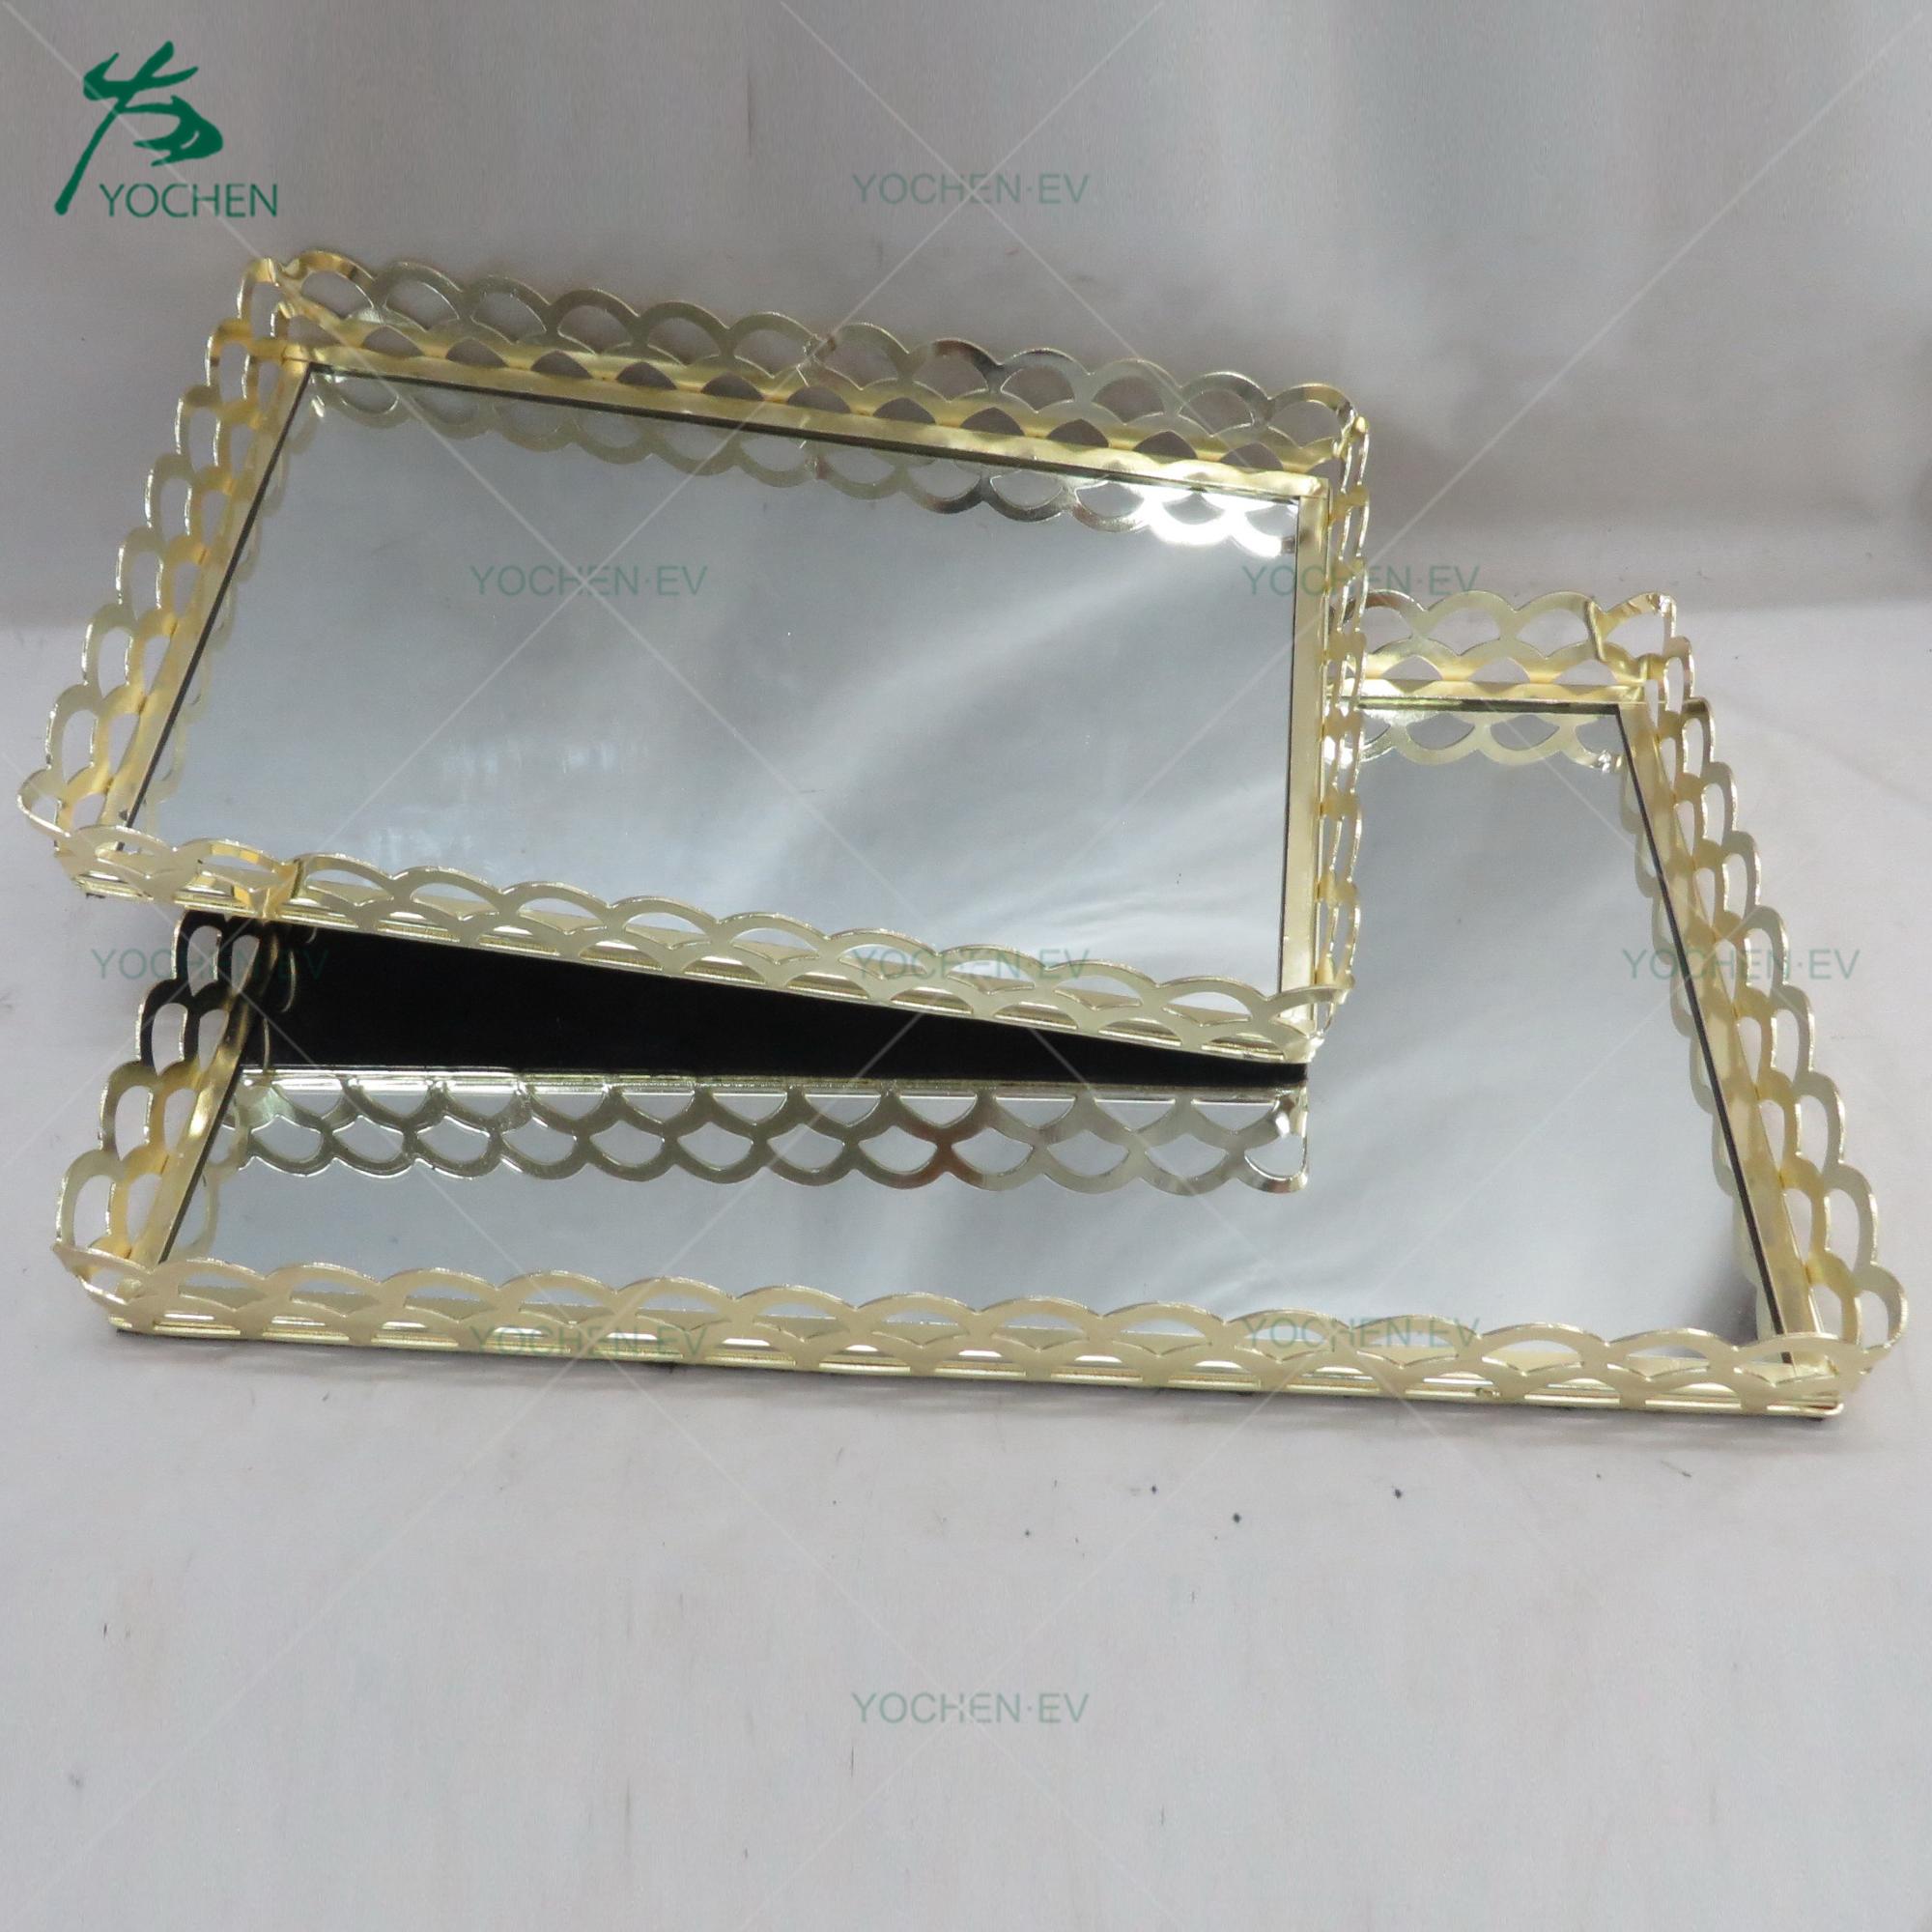 Customized antique vintage mirror serving metal tray